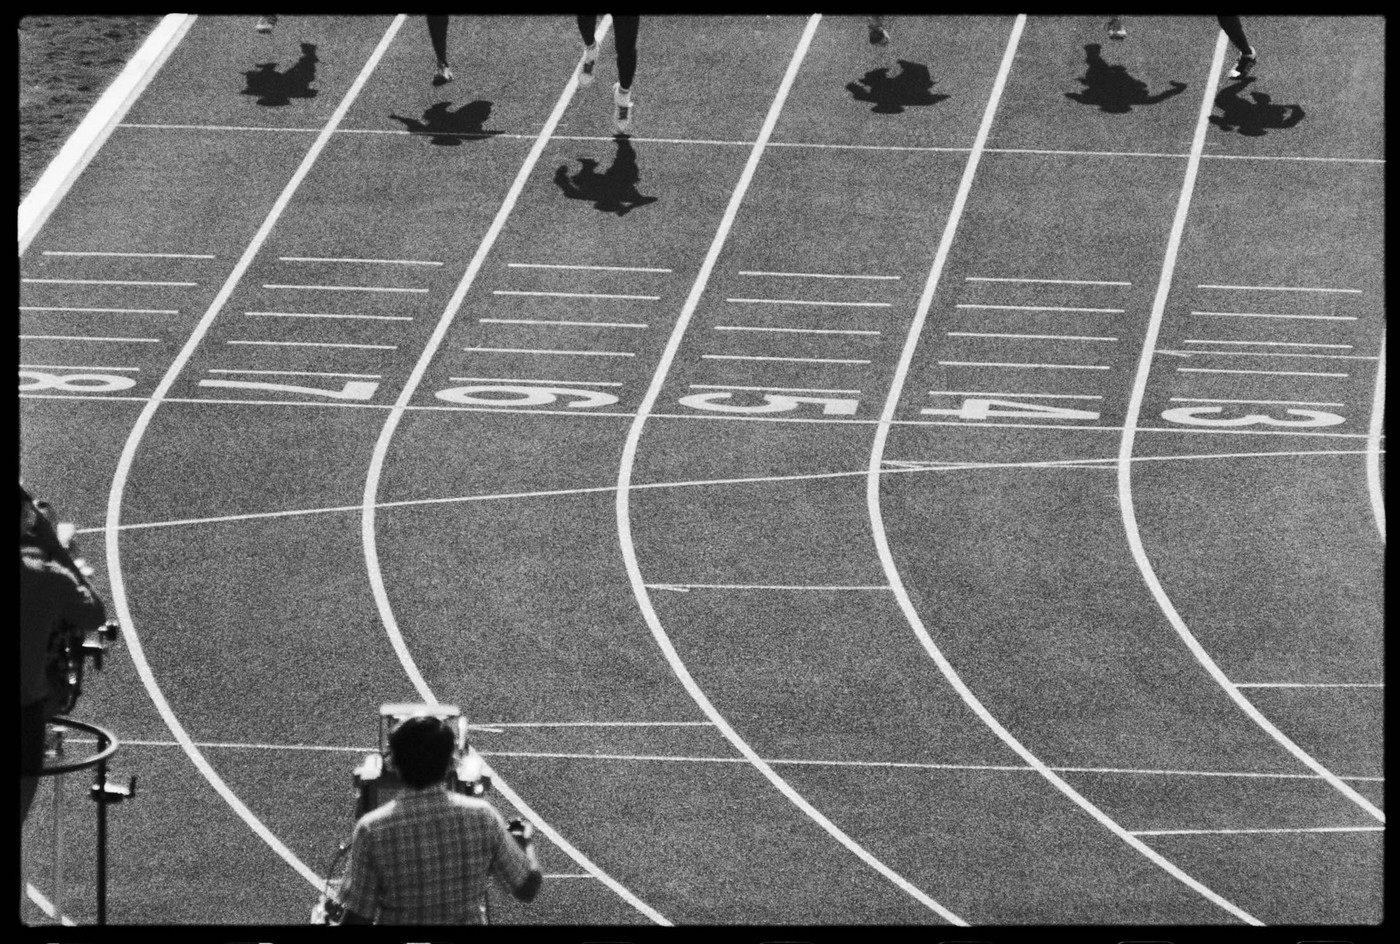 Carl Lewis touches the Finish Line, LA 1984 Olympics